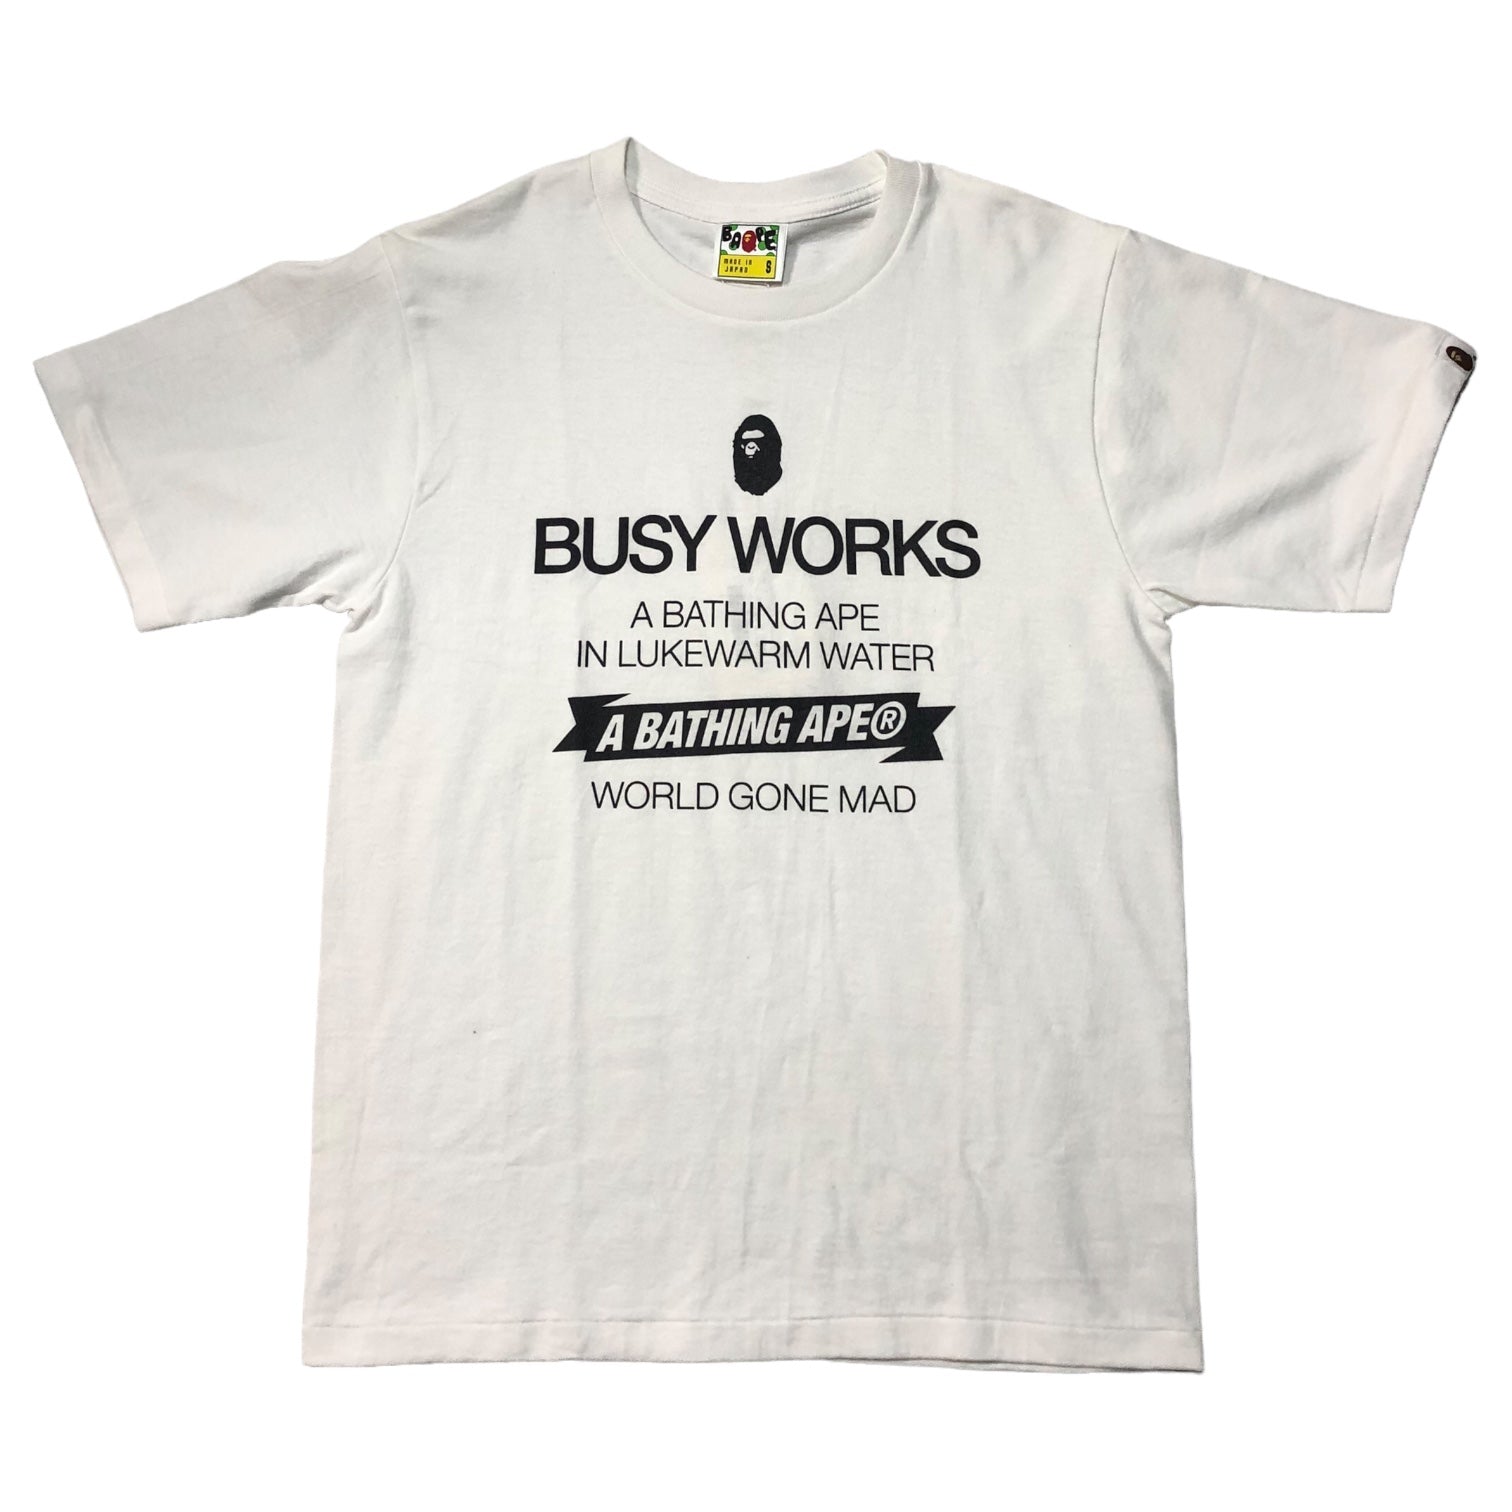 A BATHING APE(アベイシングエイプ) BUSY WORKS Tシャツ SIZE S ...